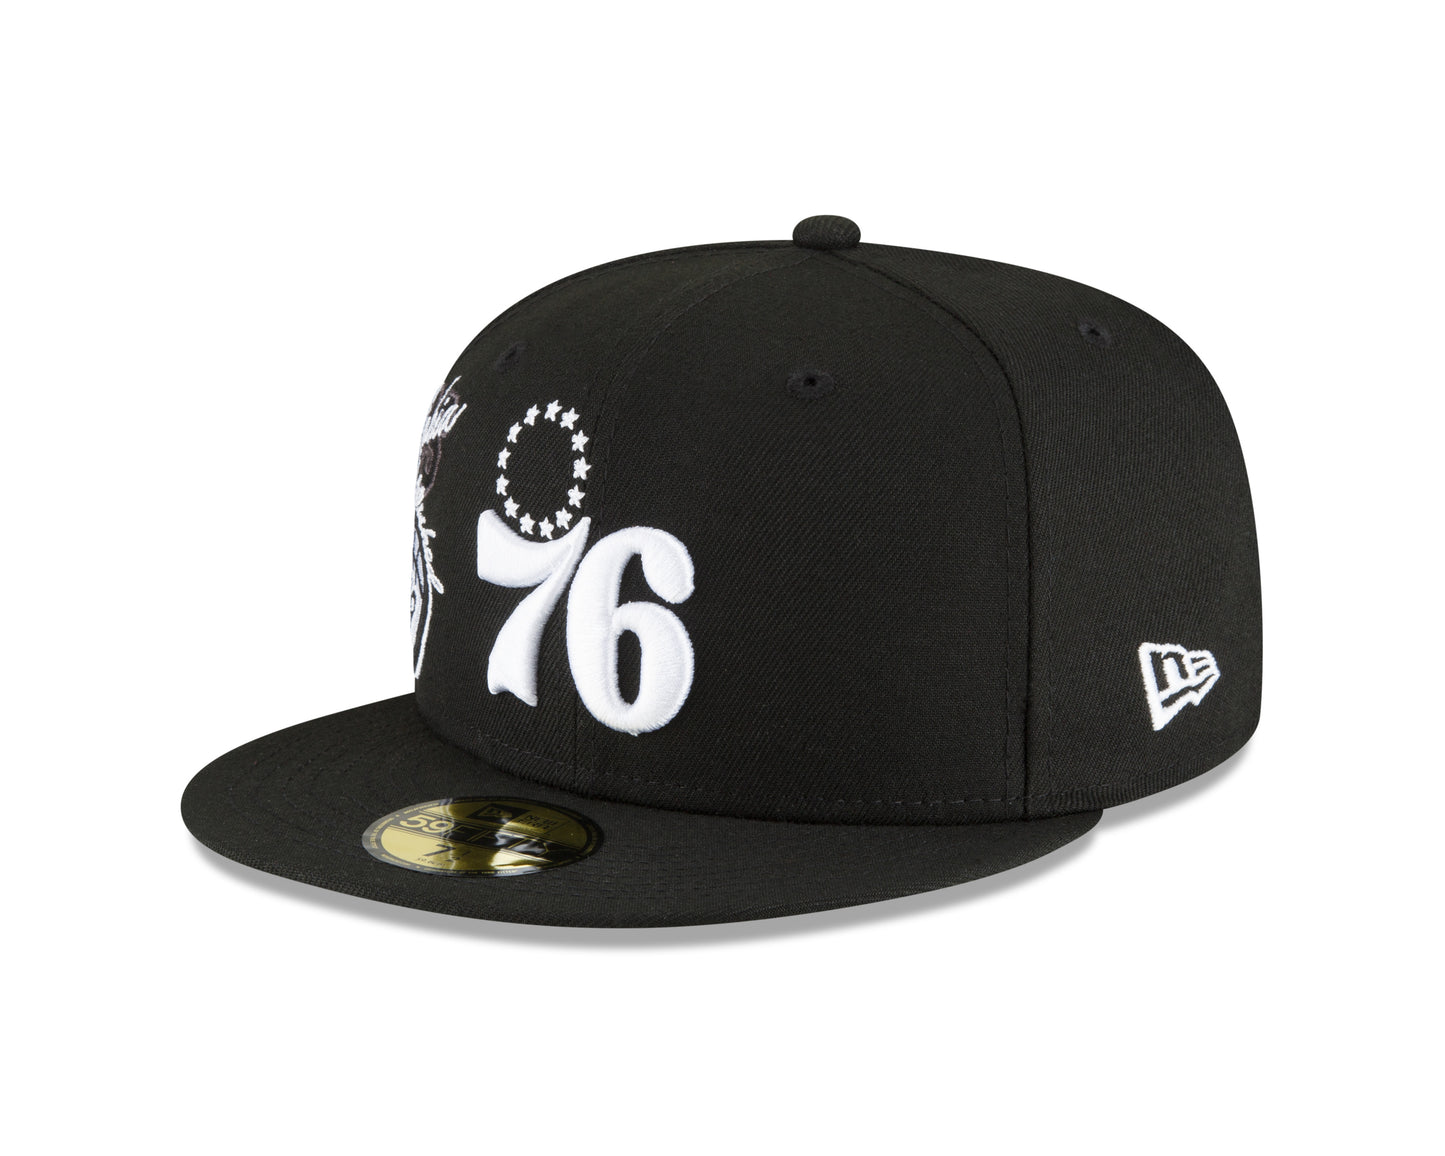 Philadelphia 76ers New Era Black and White Back Half 59fifty Fitted Hat